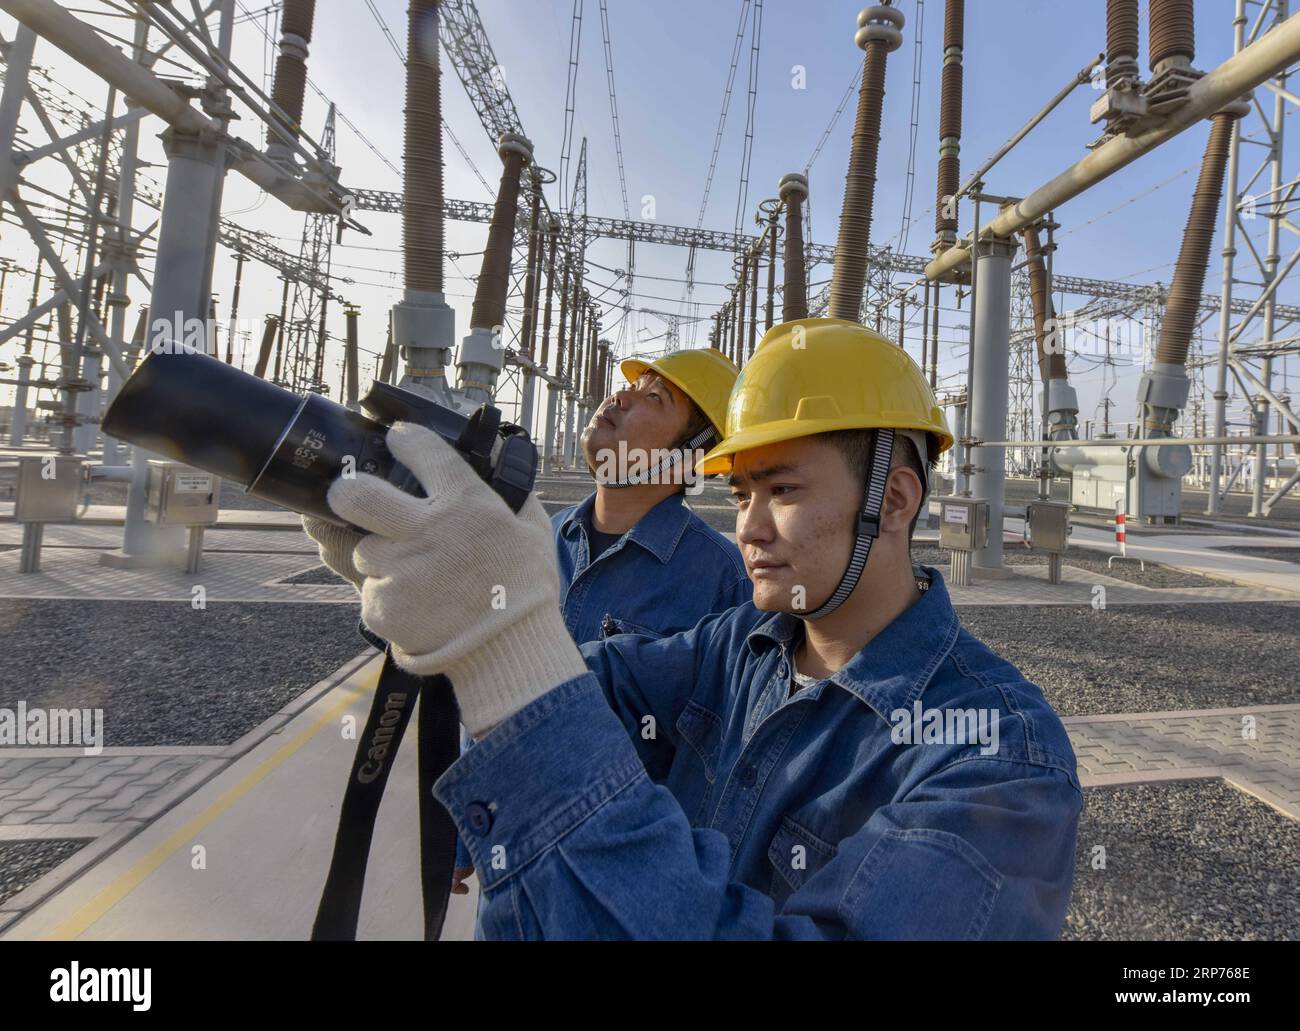 (190129) -- BEIJING, Jan. 29, 2019 (Xinhua) -- Staff members check the facilities at a transformer substation in Turpan, northwest China s Xinjiang Uygur Autonomous Region, Sept. 18, 2018. New energy power generation saw double digit growth last year in northwest China s Xinjiang Uygur Autonomous Region amid efforts to reduce coal consumption to improve the energy mix. Wind and solar power generation rose 15.2 percent and 13.6 percent to 36 billion kwh and 11.7 billion kwh respectively, according to the regional development and reform commission. It said 22.9 percent of installed wind power ge Stock Photo